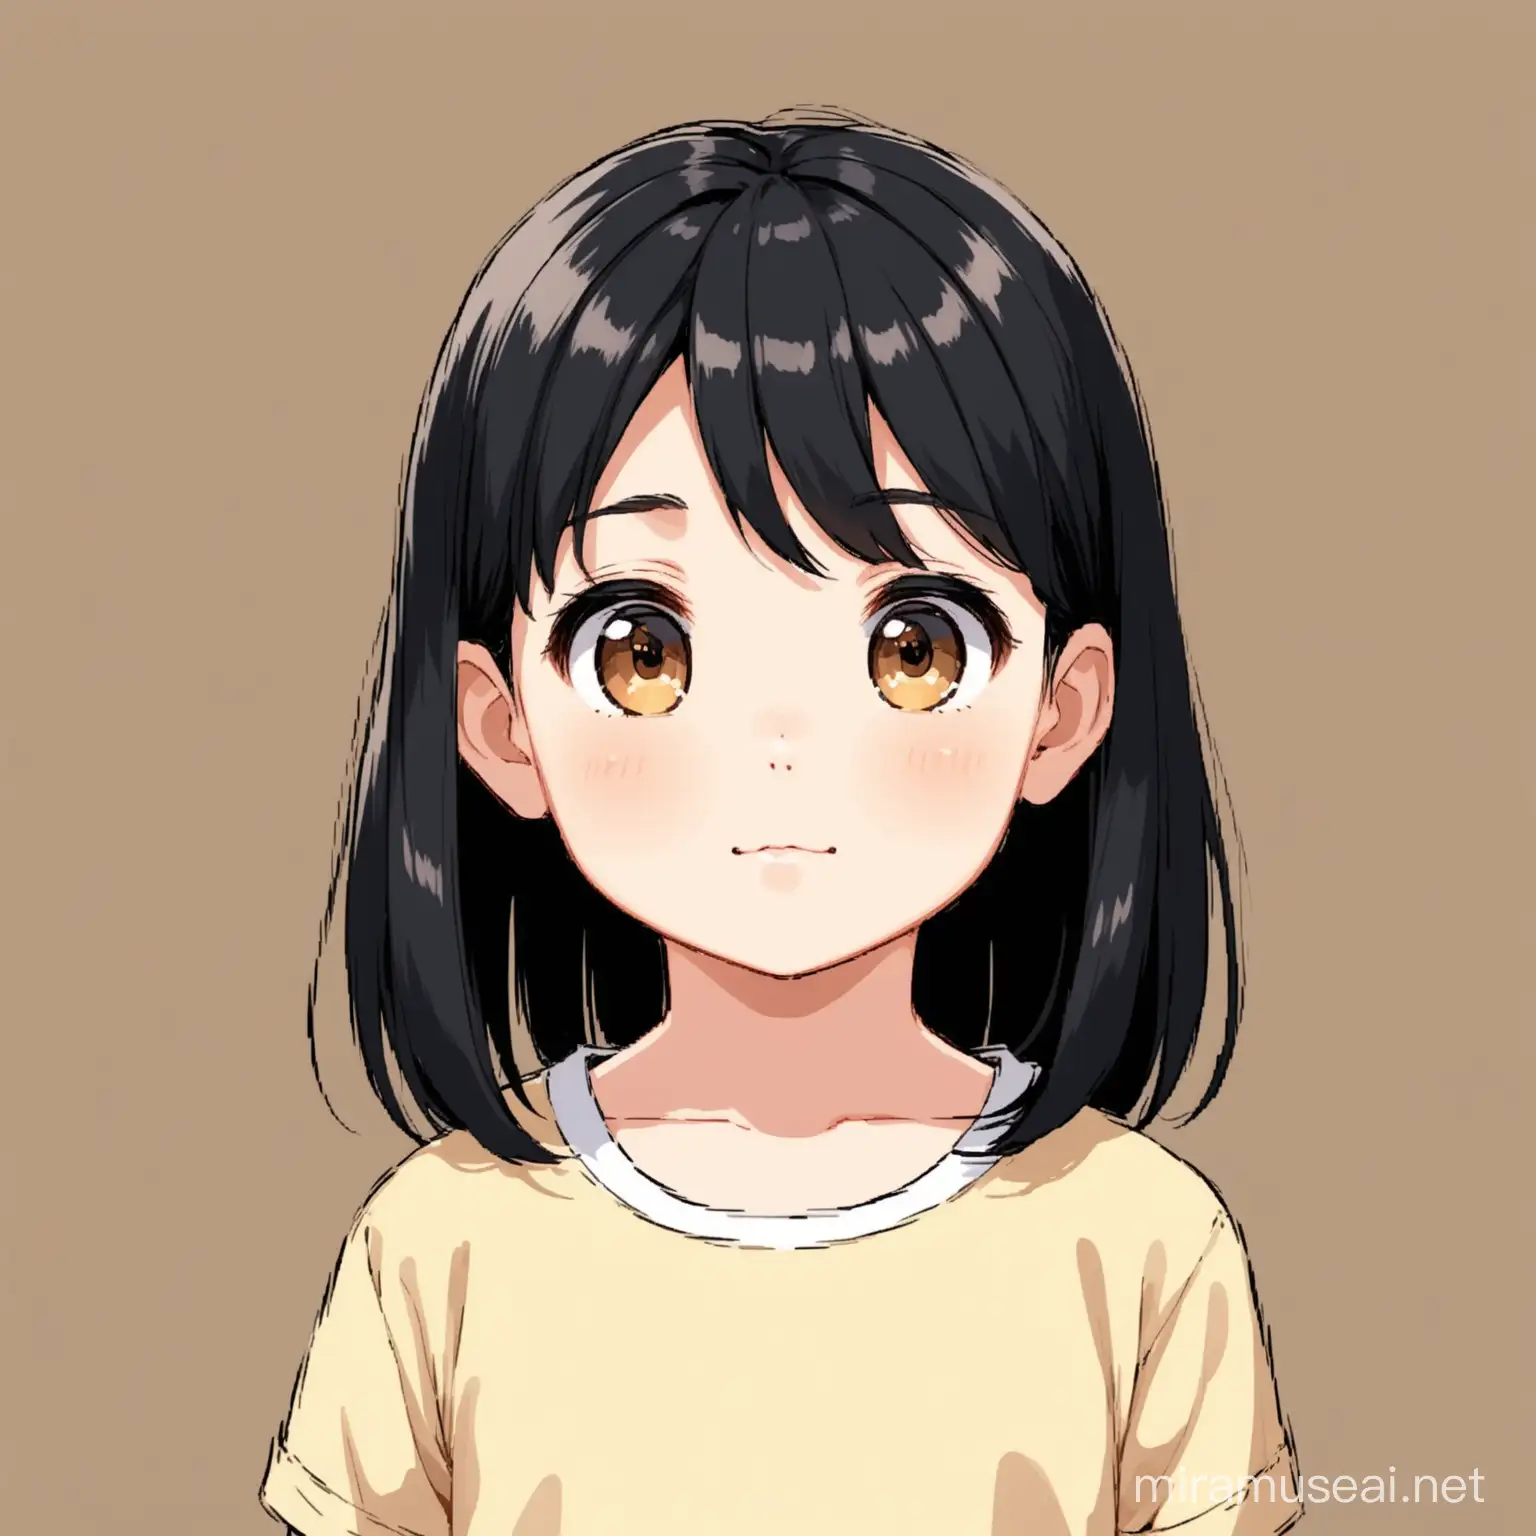 Adorable FiveYearOld Girl with Black Hair Animated Portrait